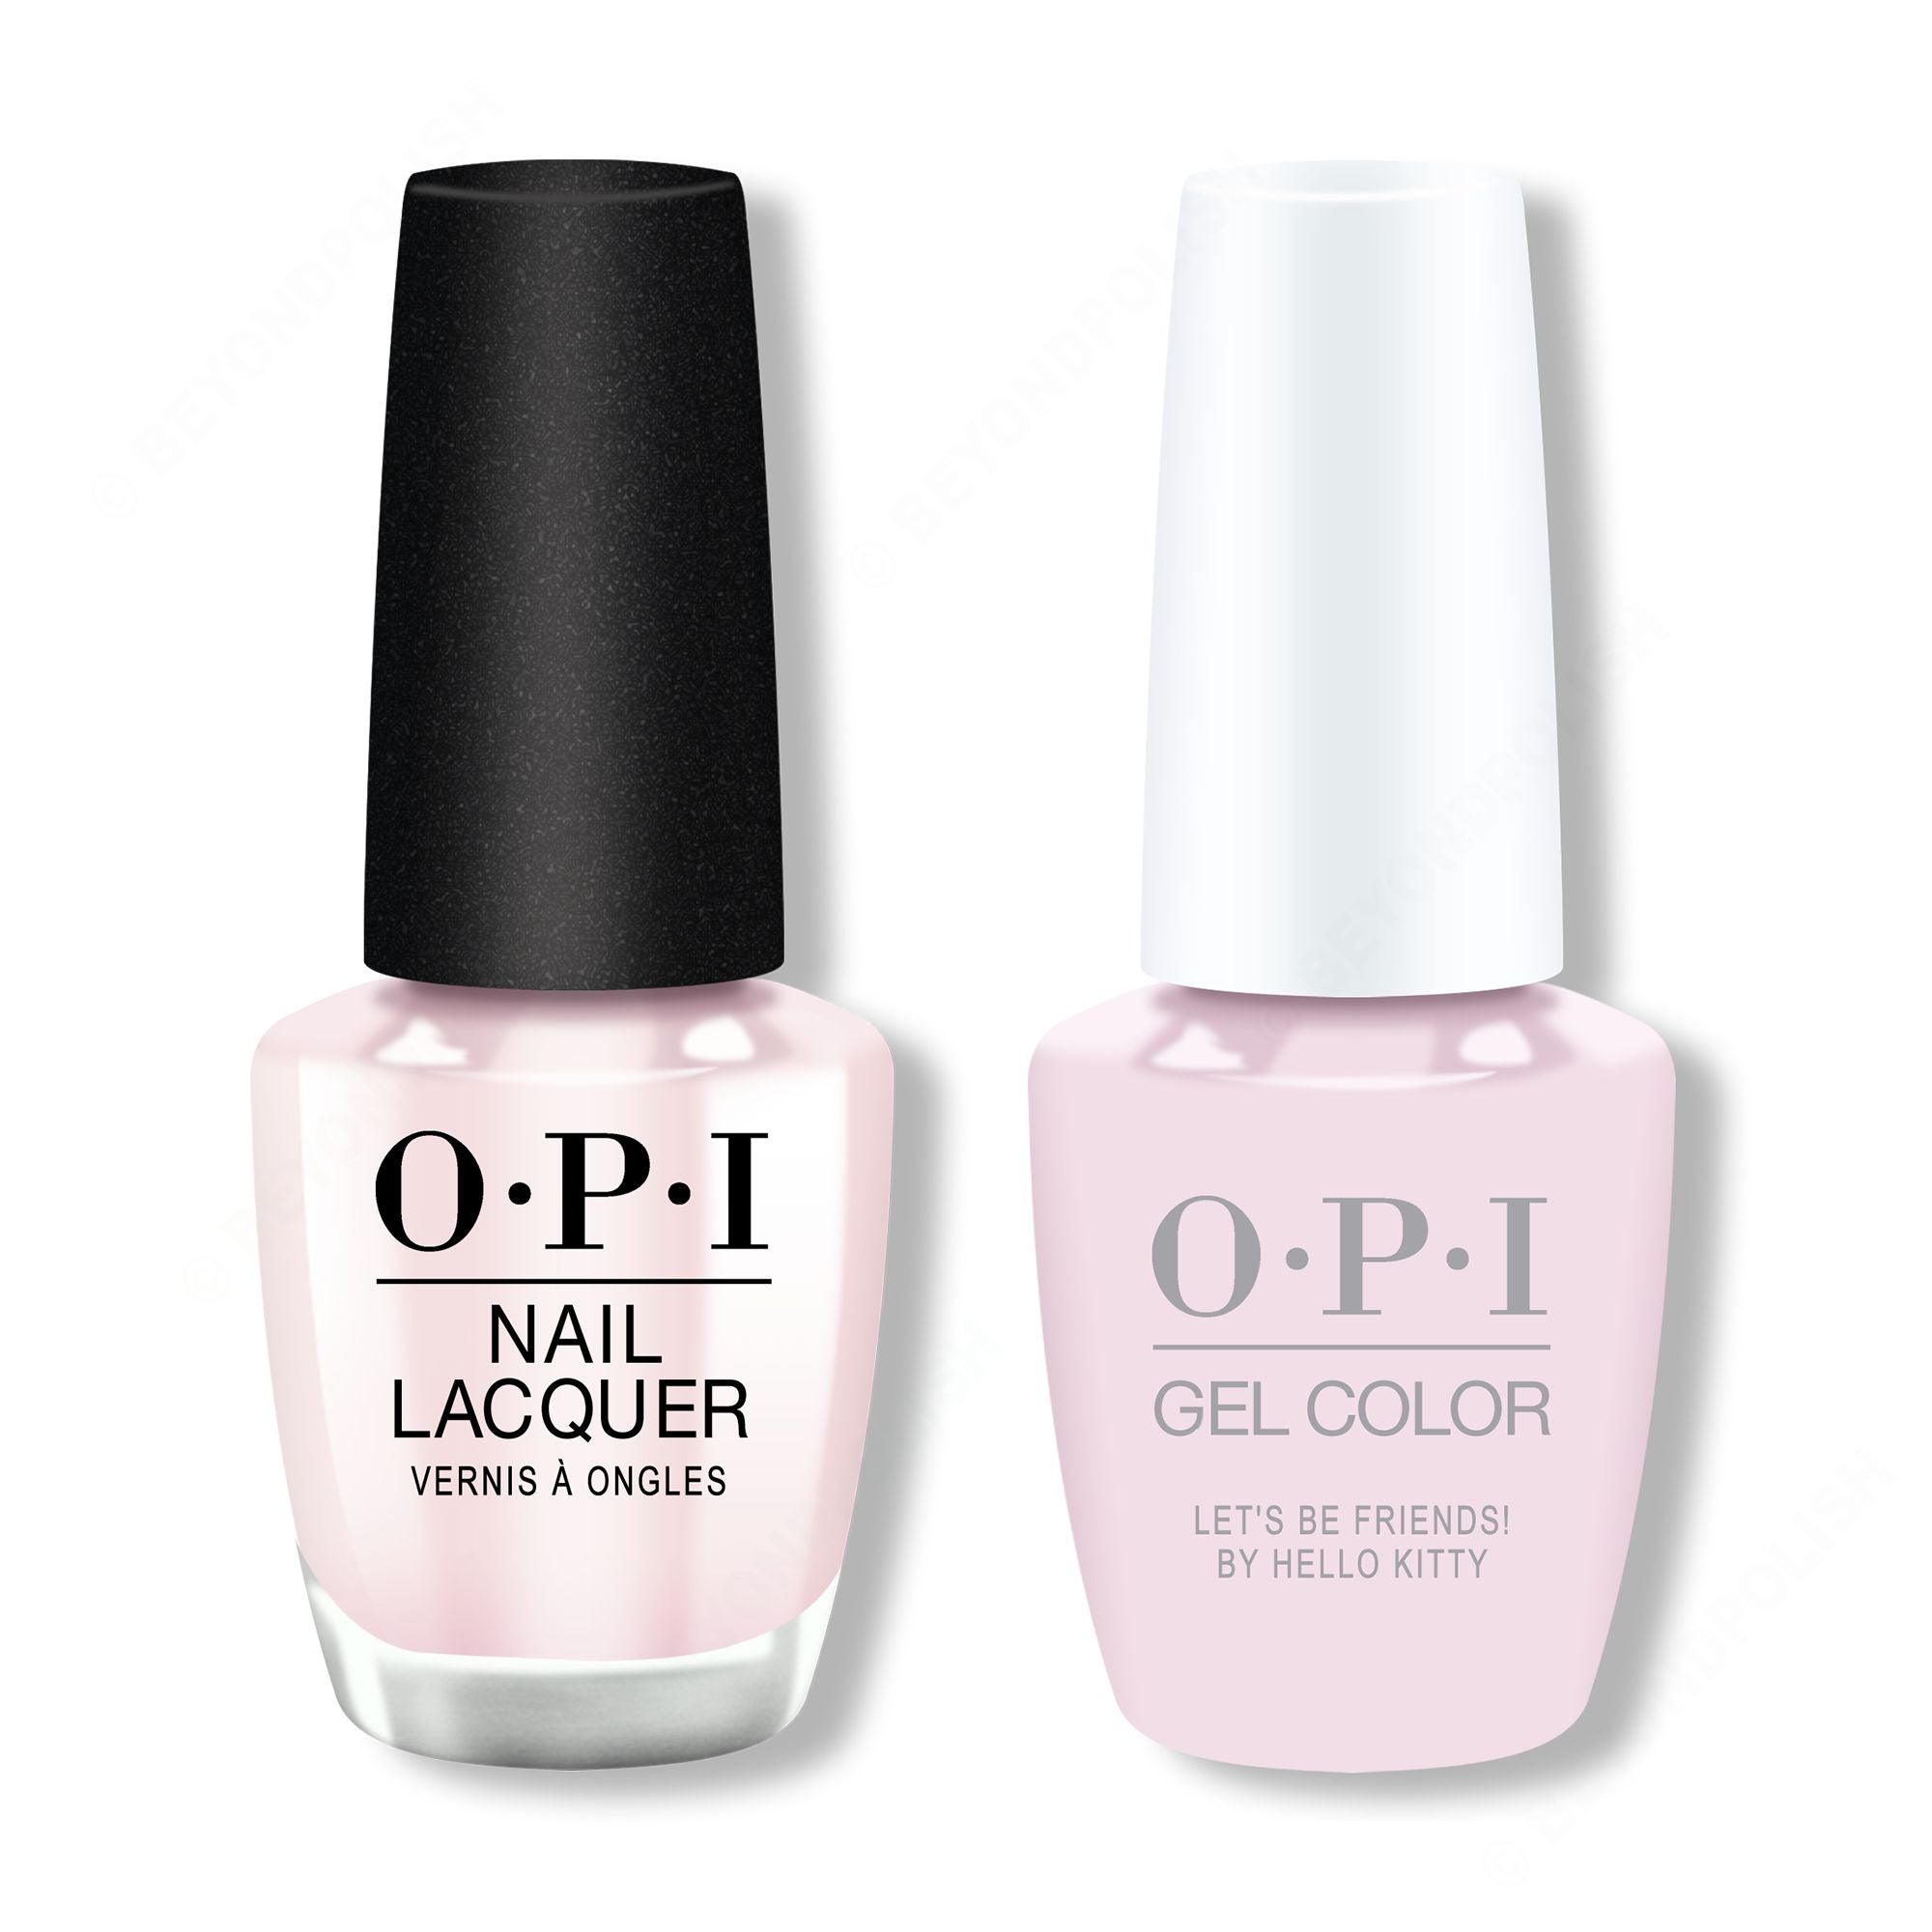 OPI - Gel & Lacquer Combo - Let's Be Friends! - Gel & Lacquer Polish at Beyond Polish